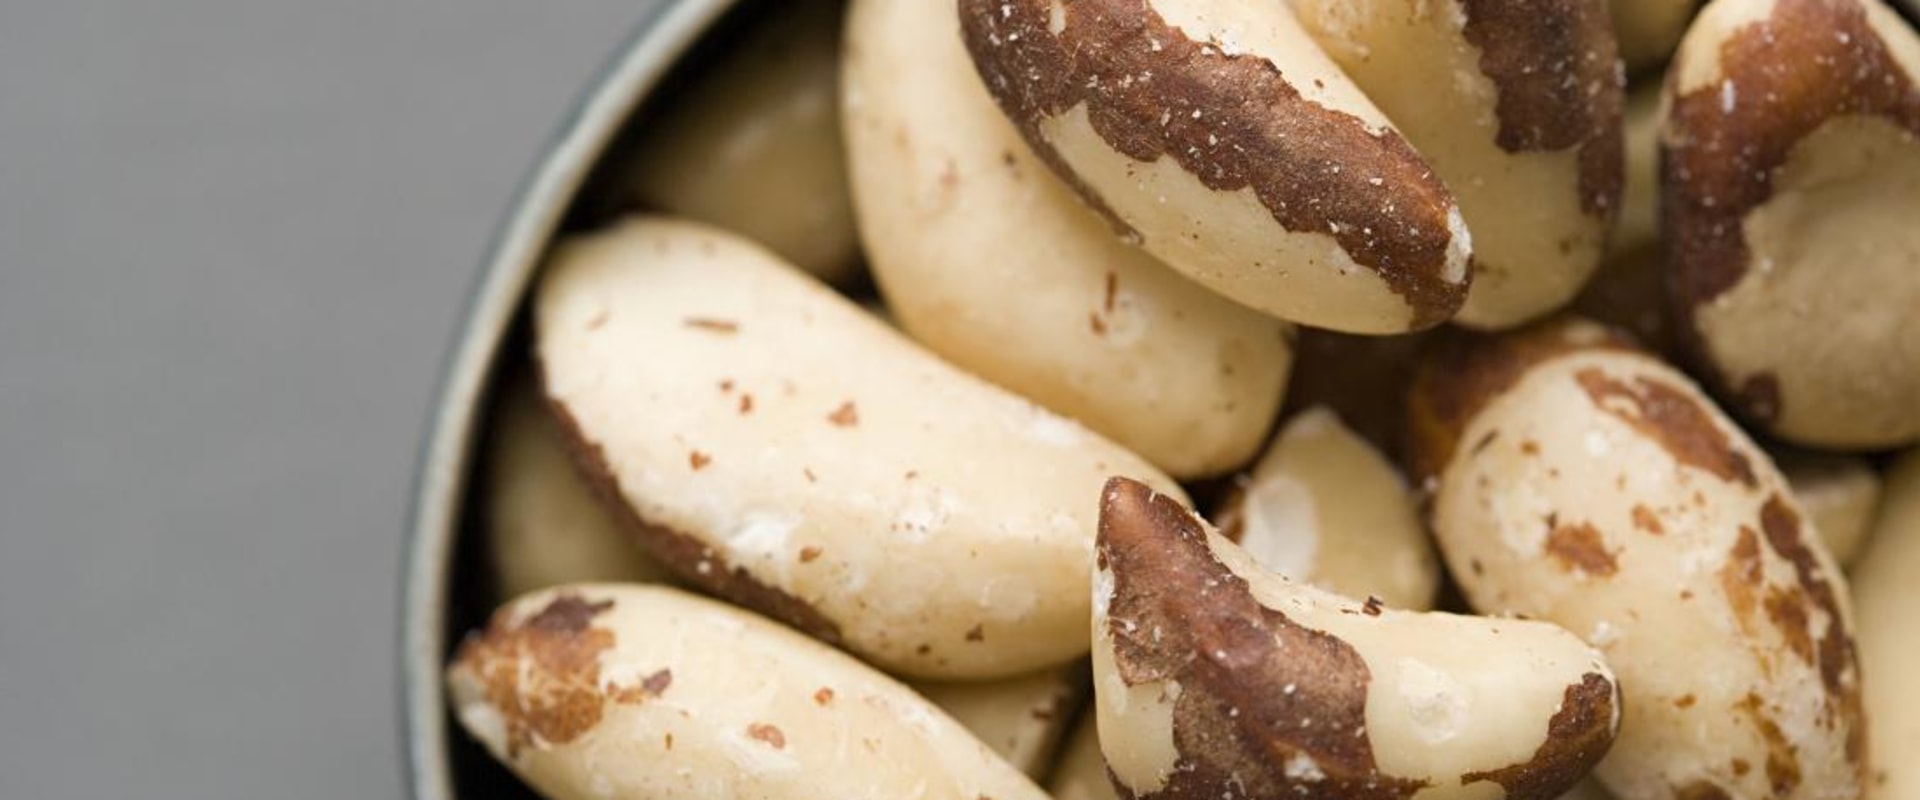 Is there a problem with brazil nuts?